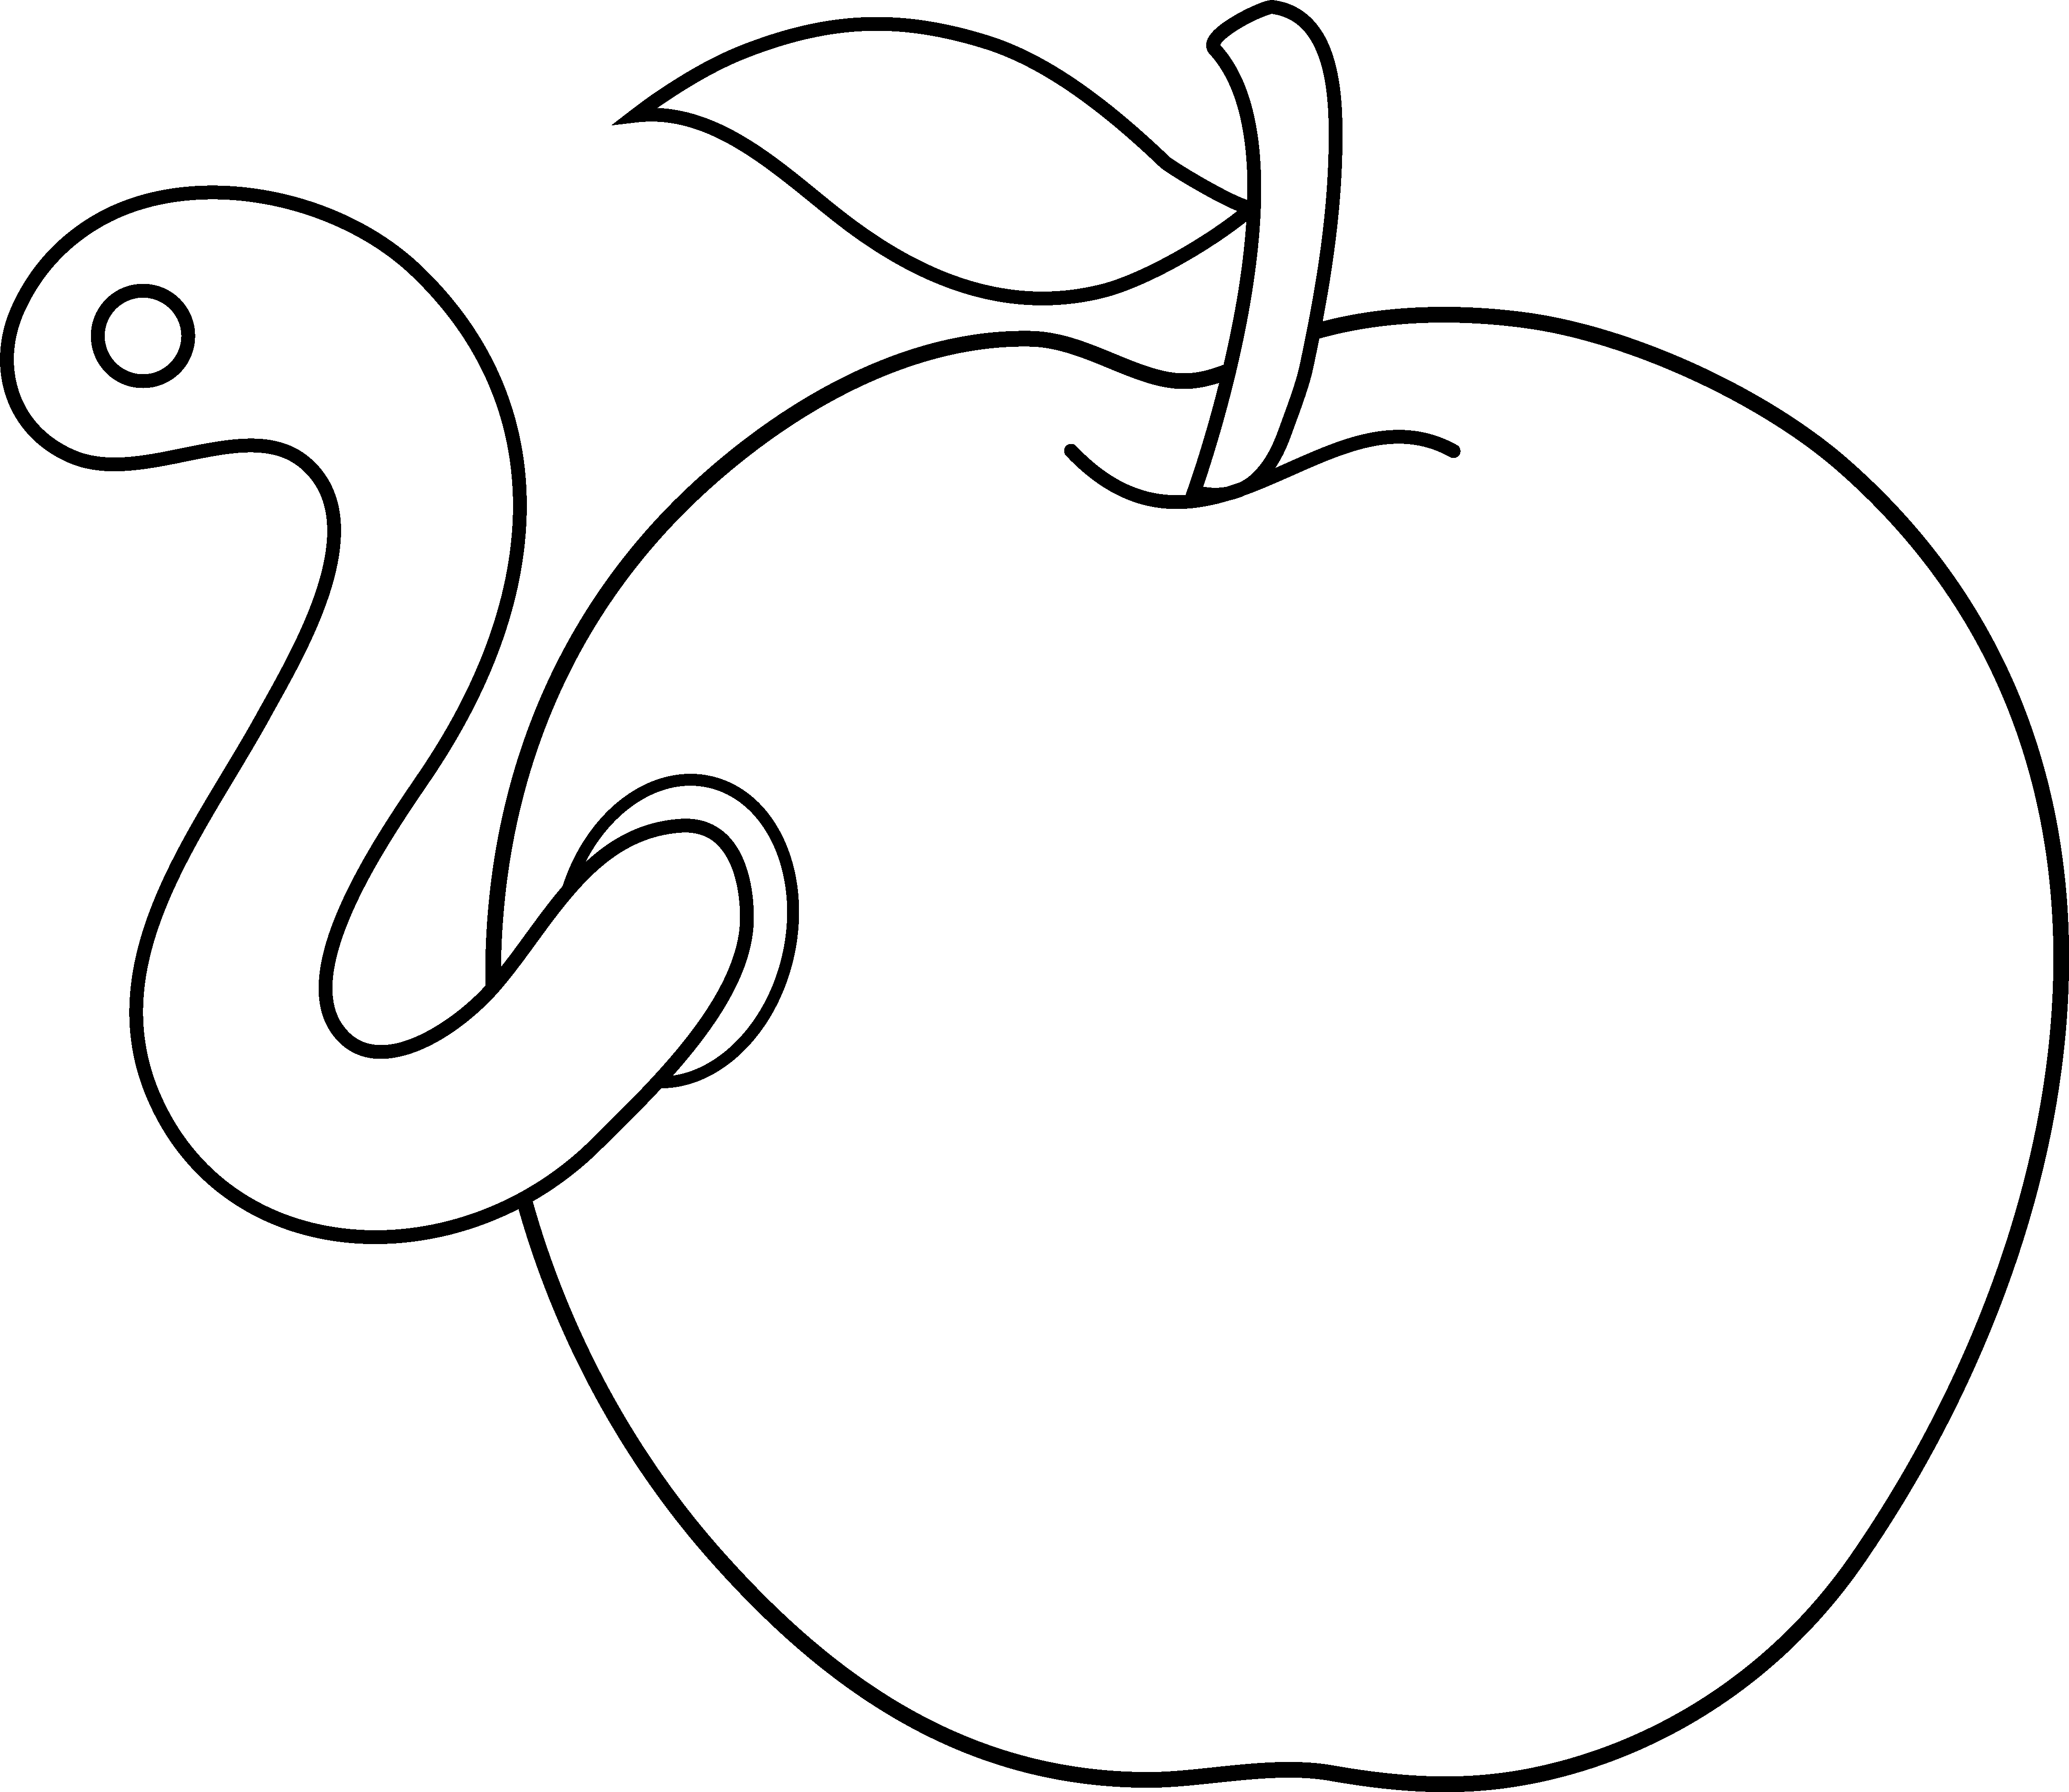 Images For > Apple Orchard Clip Art Black And White